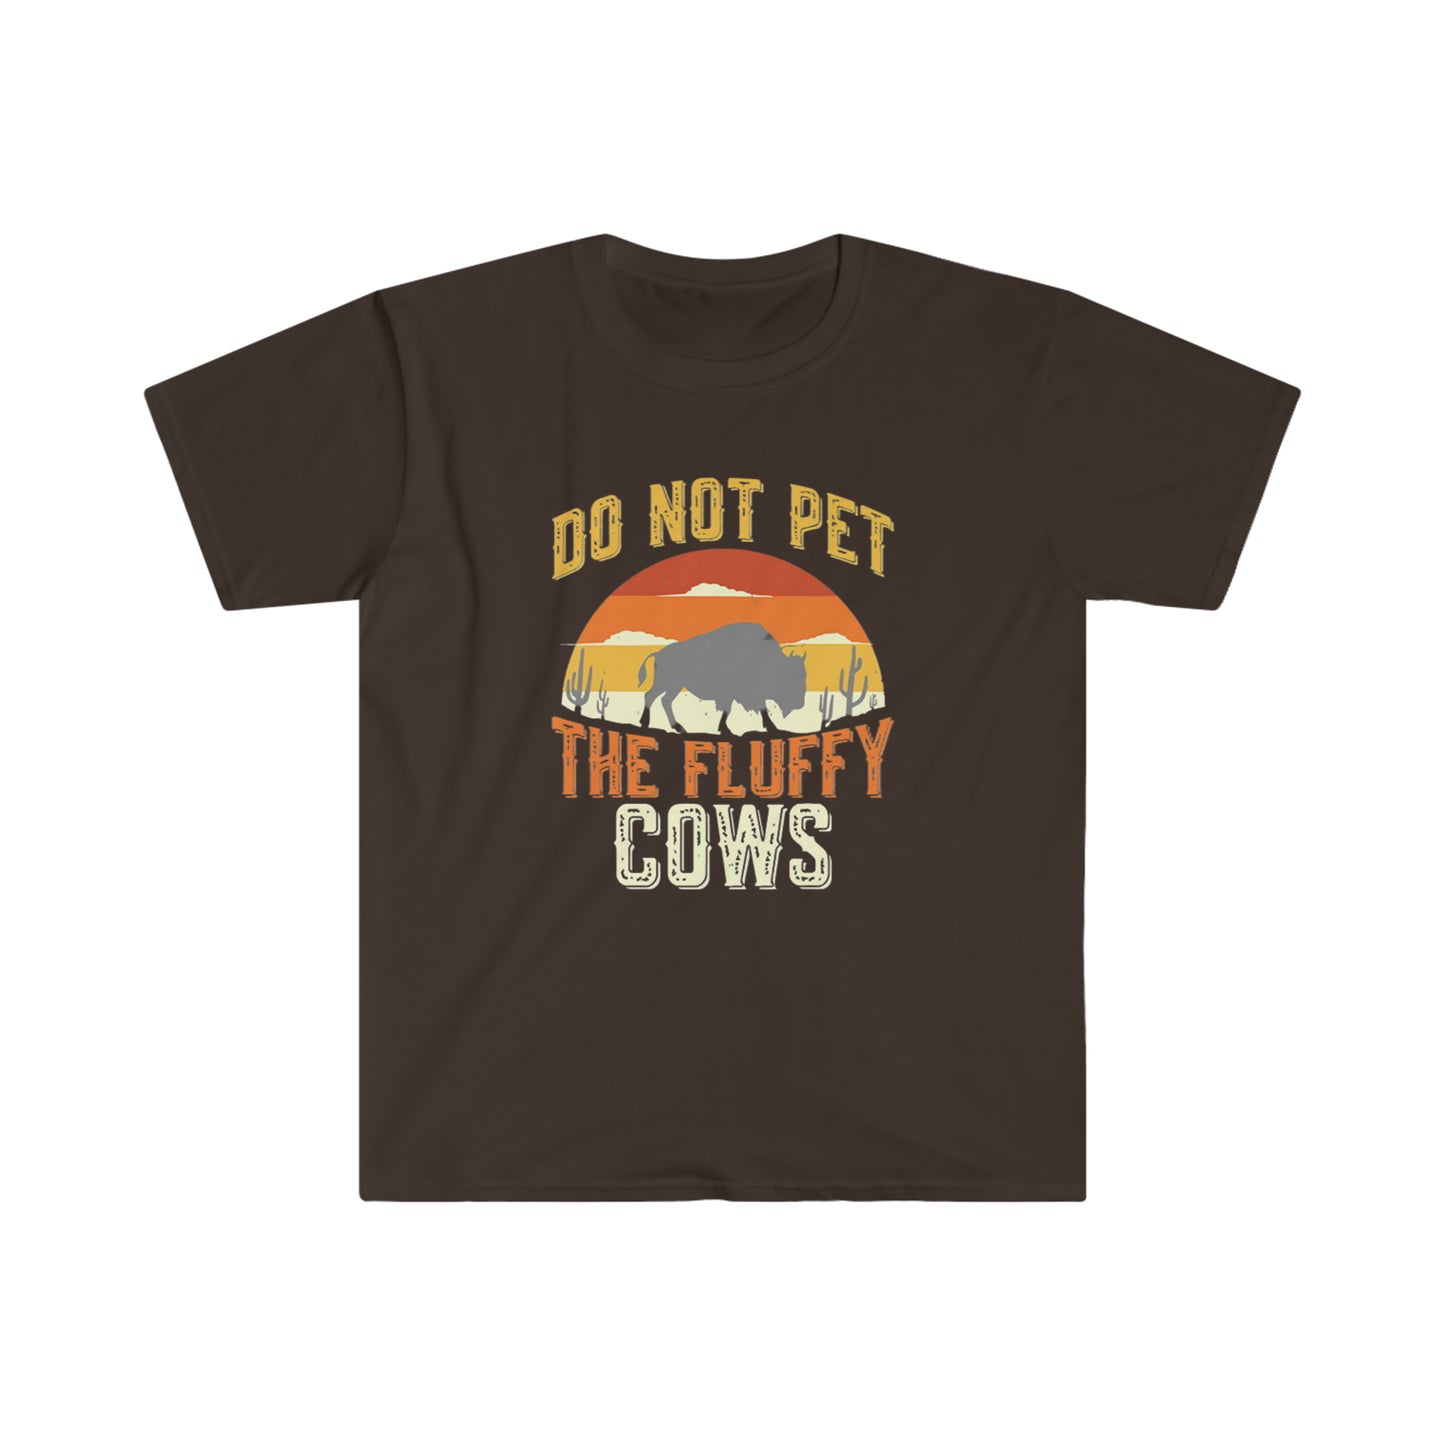 Do not pet the fluffy cows - Unisex Softstyle T-Shirt